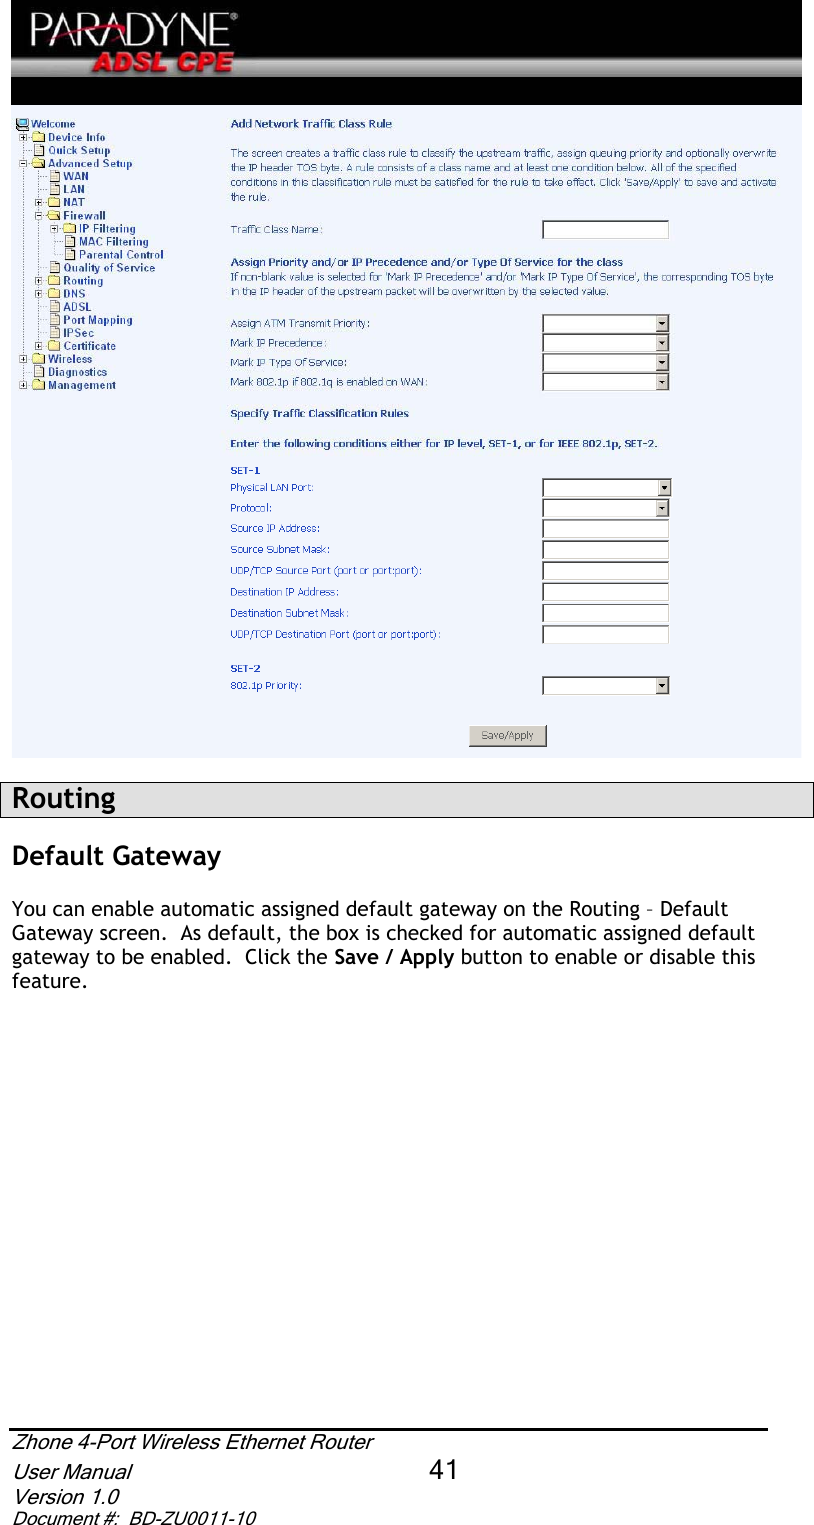 RoutingDefault GatewayYou can enable automatic assigned default gateway on the Routing – Default Gateway screen.  As default, the box is checked for automatic assigned default gateway to be enabled.  Click the Save / Apply button to enable or disable this feature.Zhone 4-Port Wireless Ethernet Router User Manual 41Version 1.0 Document #:  BD-ZU0011-10